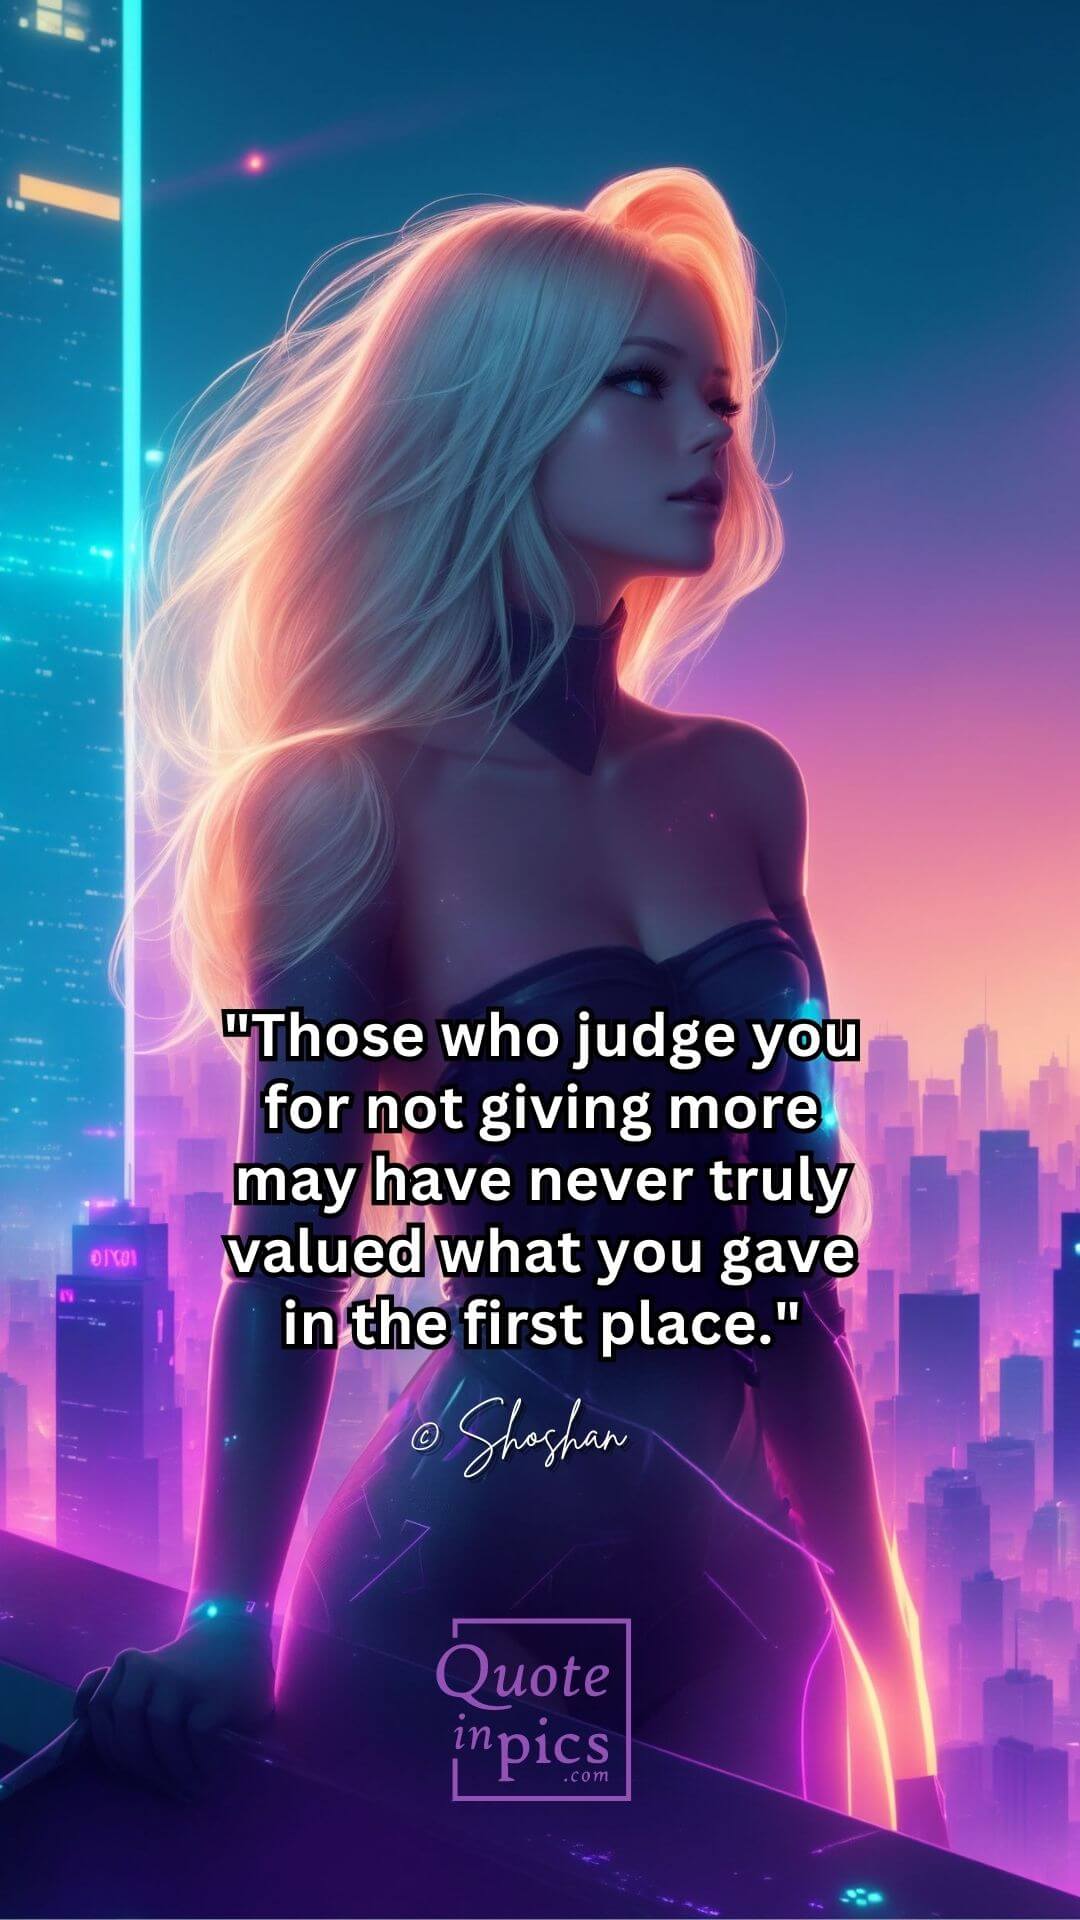 Those who judge you for not giving more may have never truly valued what you gave in the first place